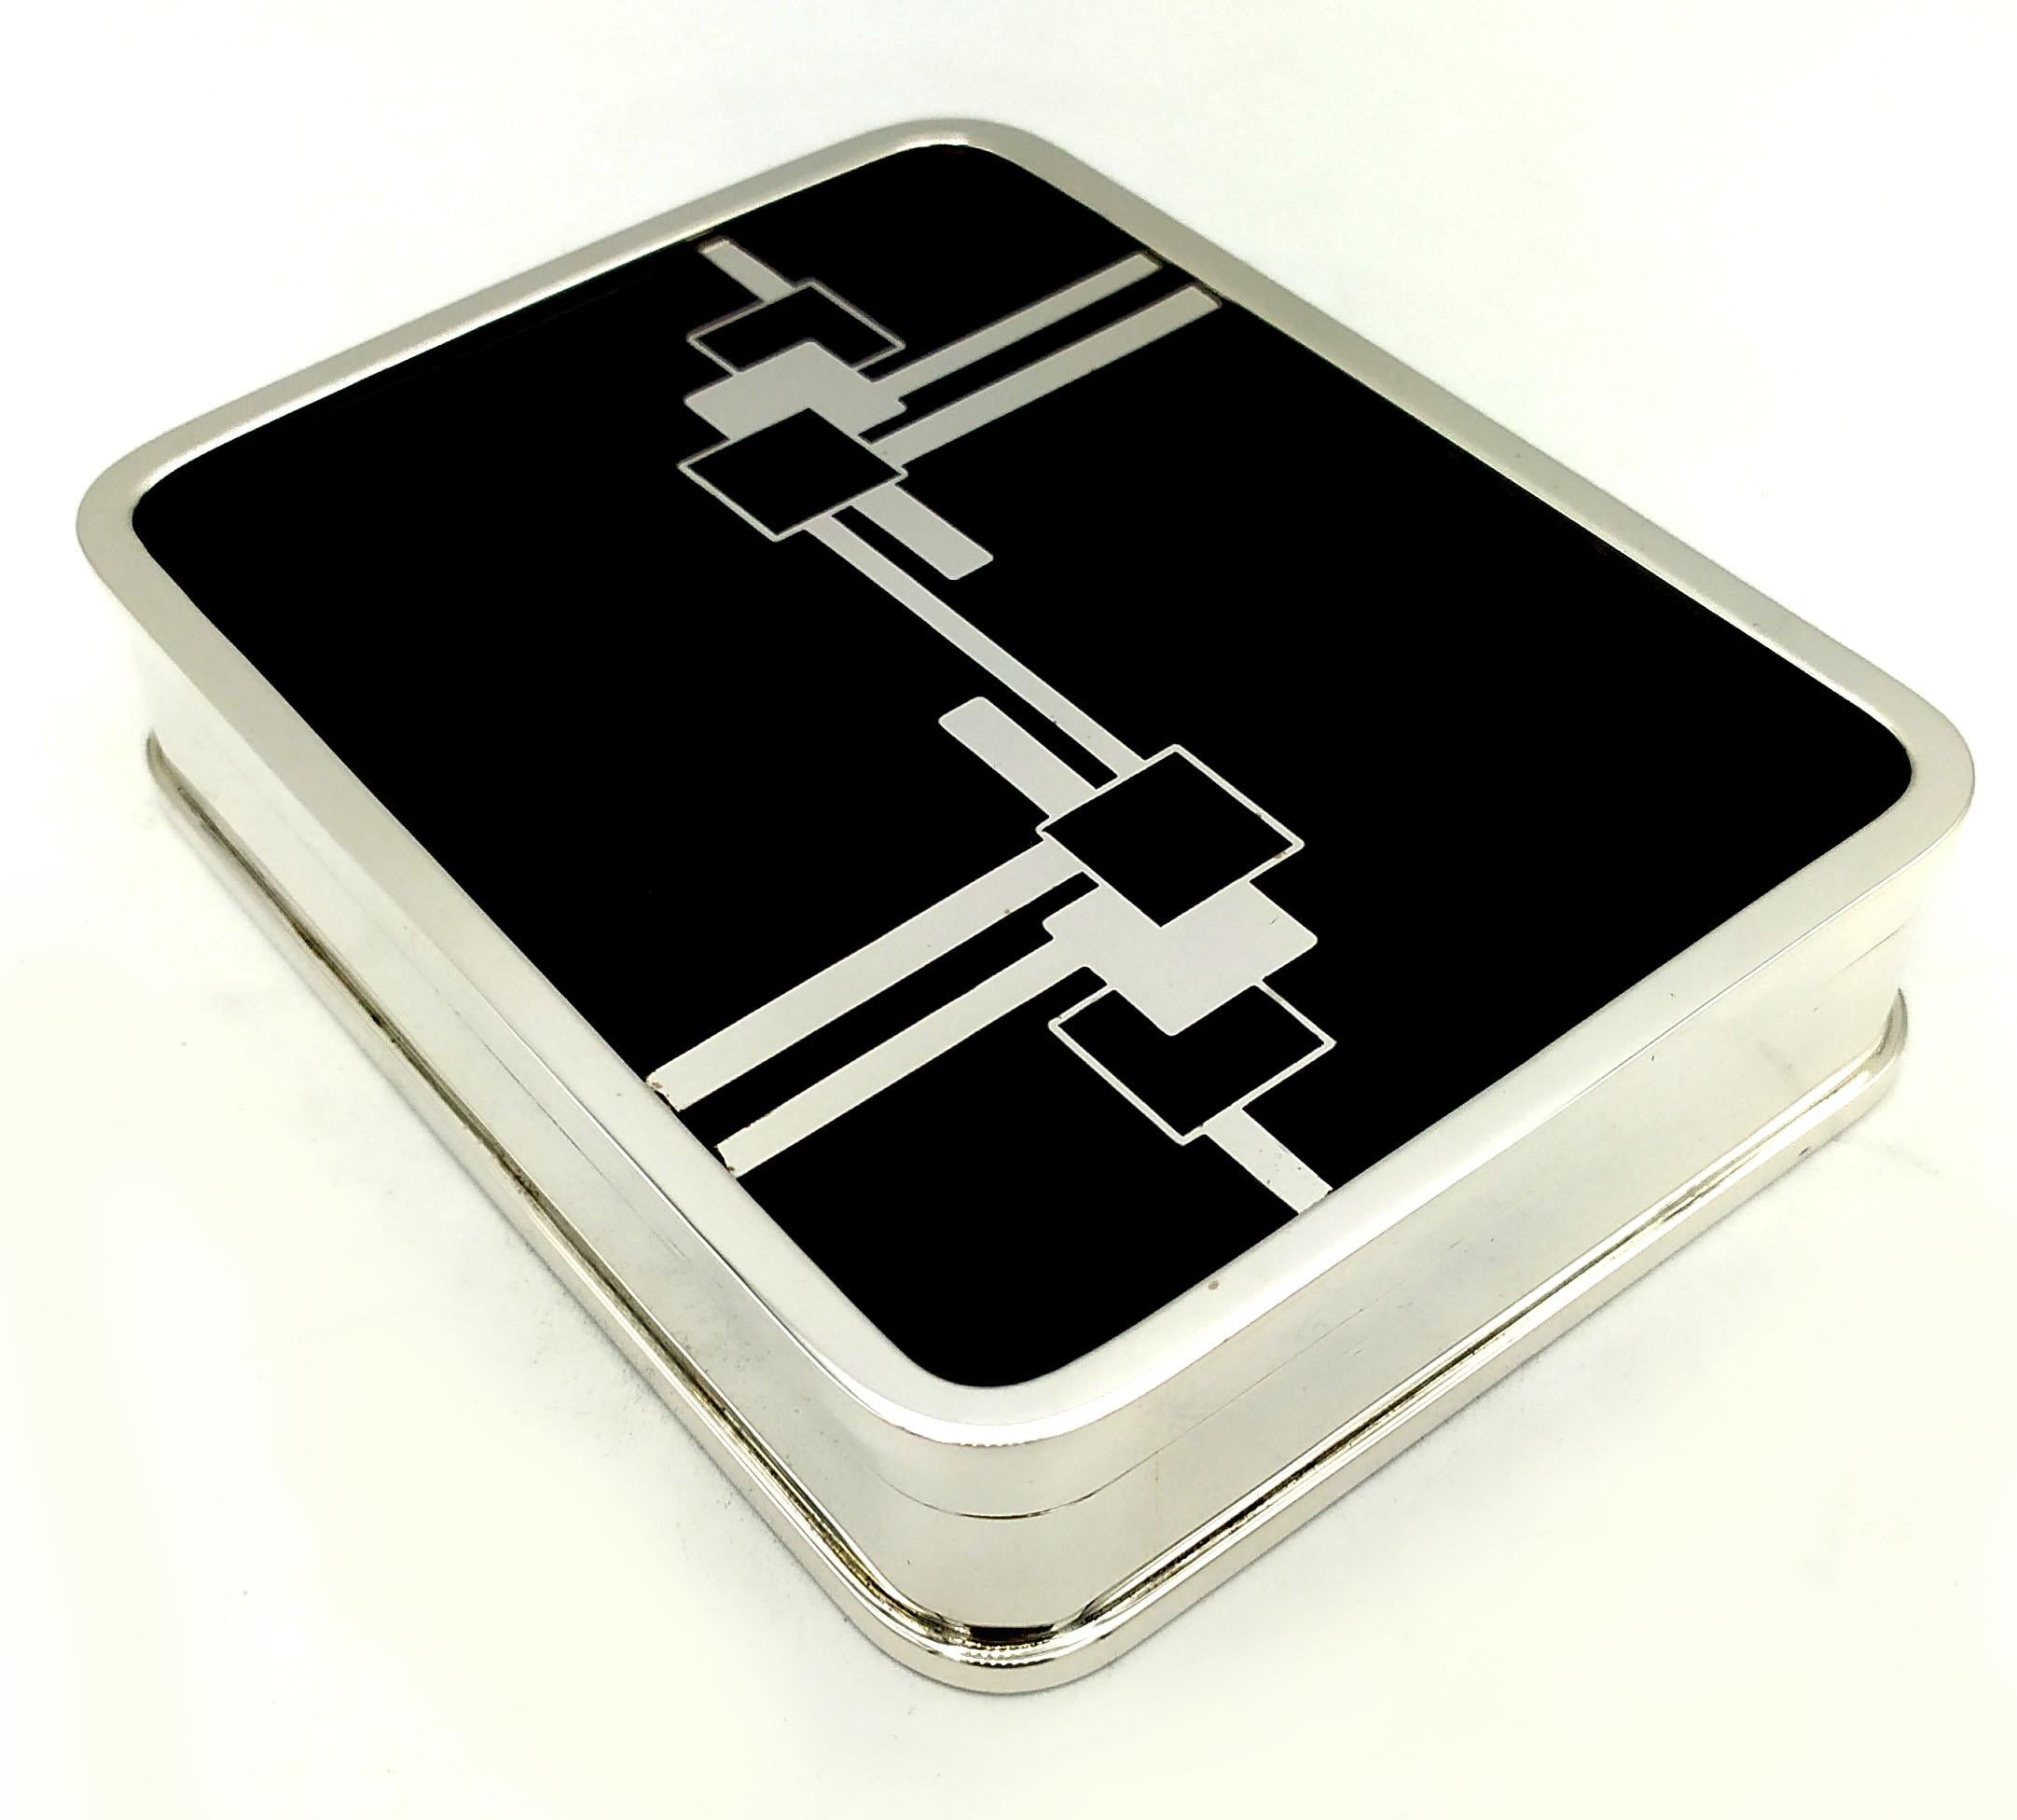 Box Black and White enamel is Inspired by drawings by Louis Cartier from the early 1920s in Art Deco style and recreated for Cartier USA in 1976.
It is in 925/1000 sterling.
Box Black and White has hand painted fired enamels geometric design.
Box